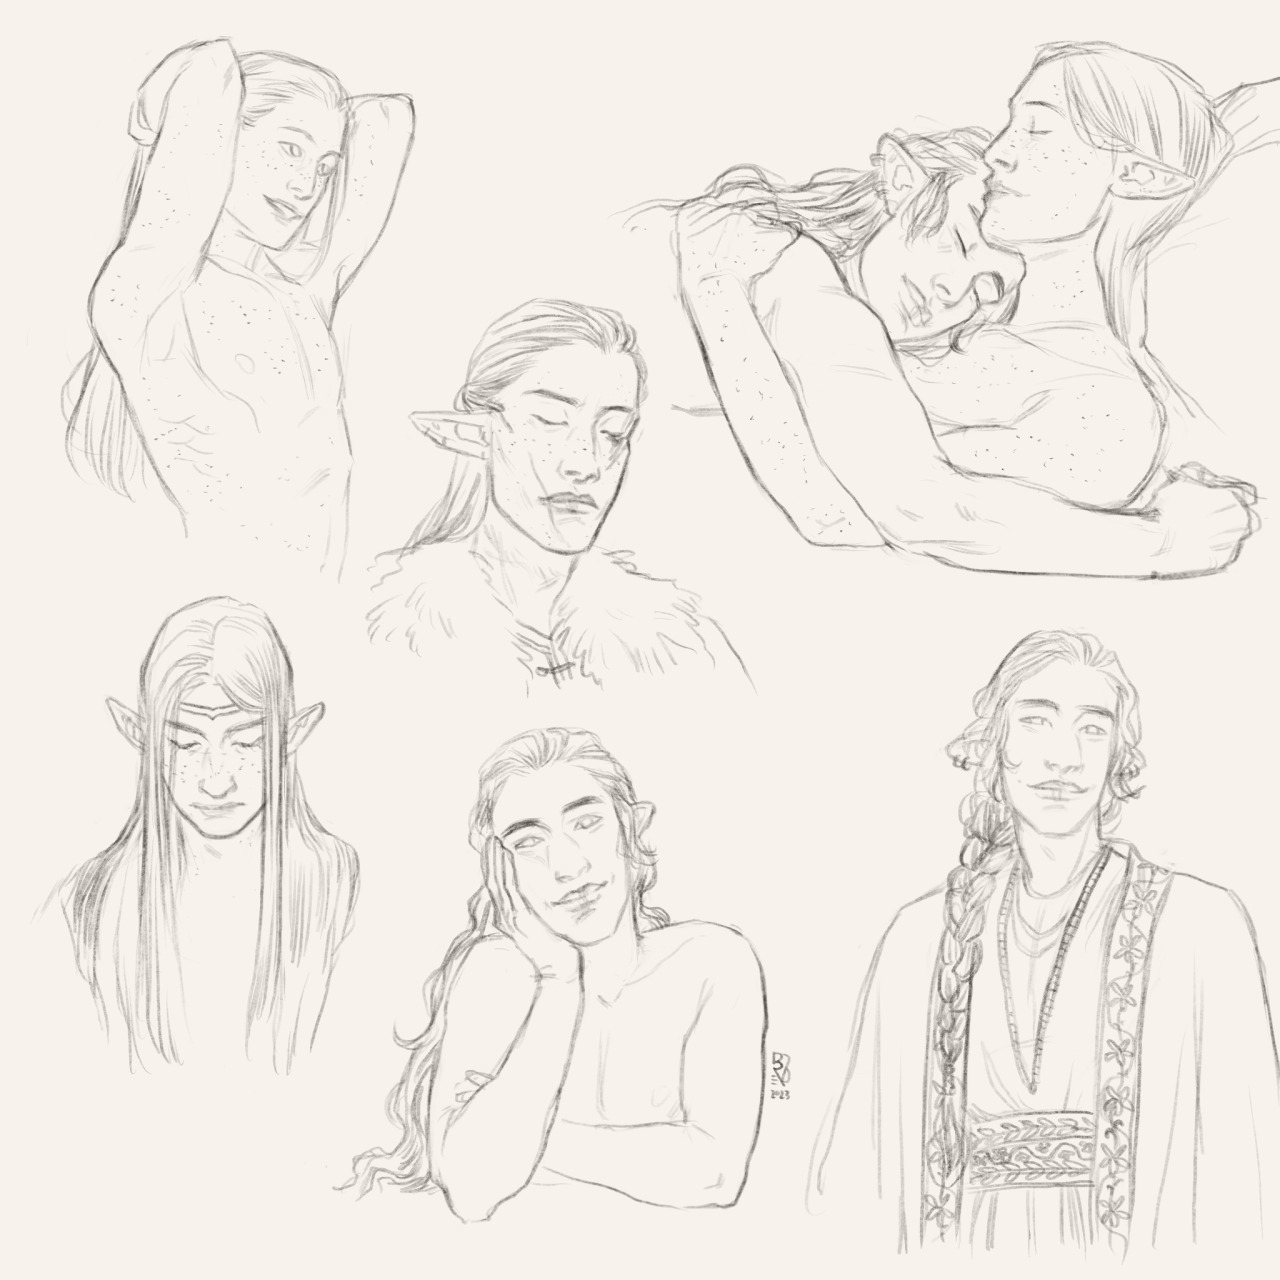 Russingon Sketches by Dorothea/busymagpie